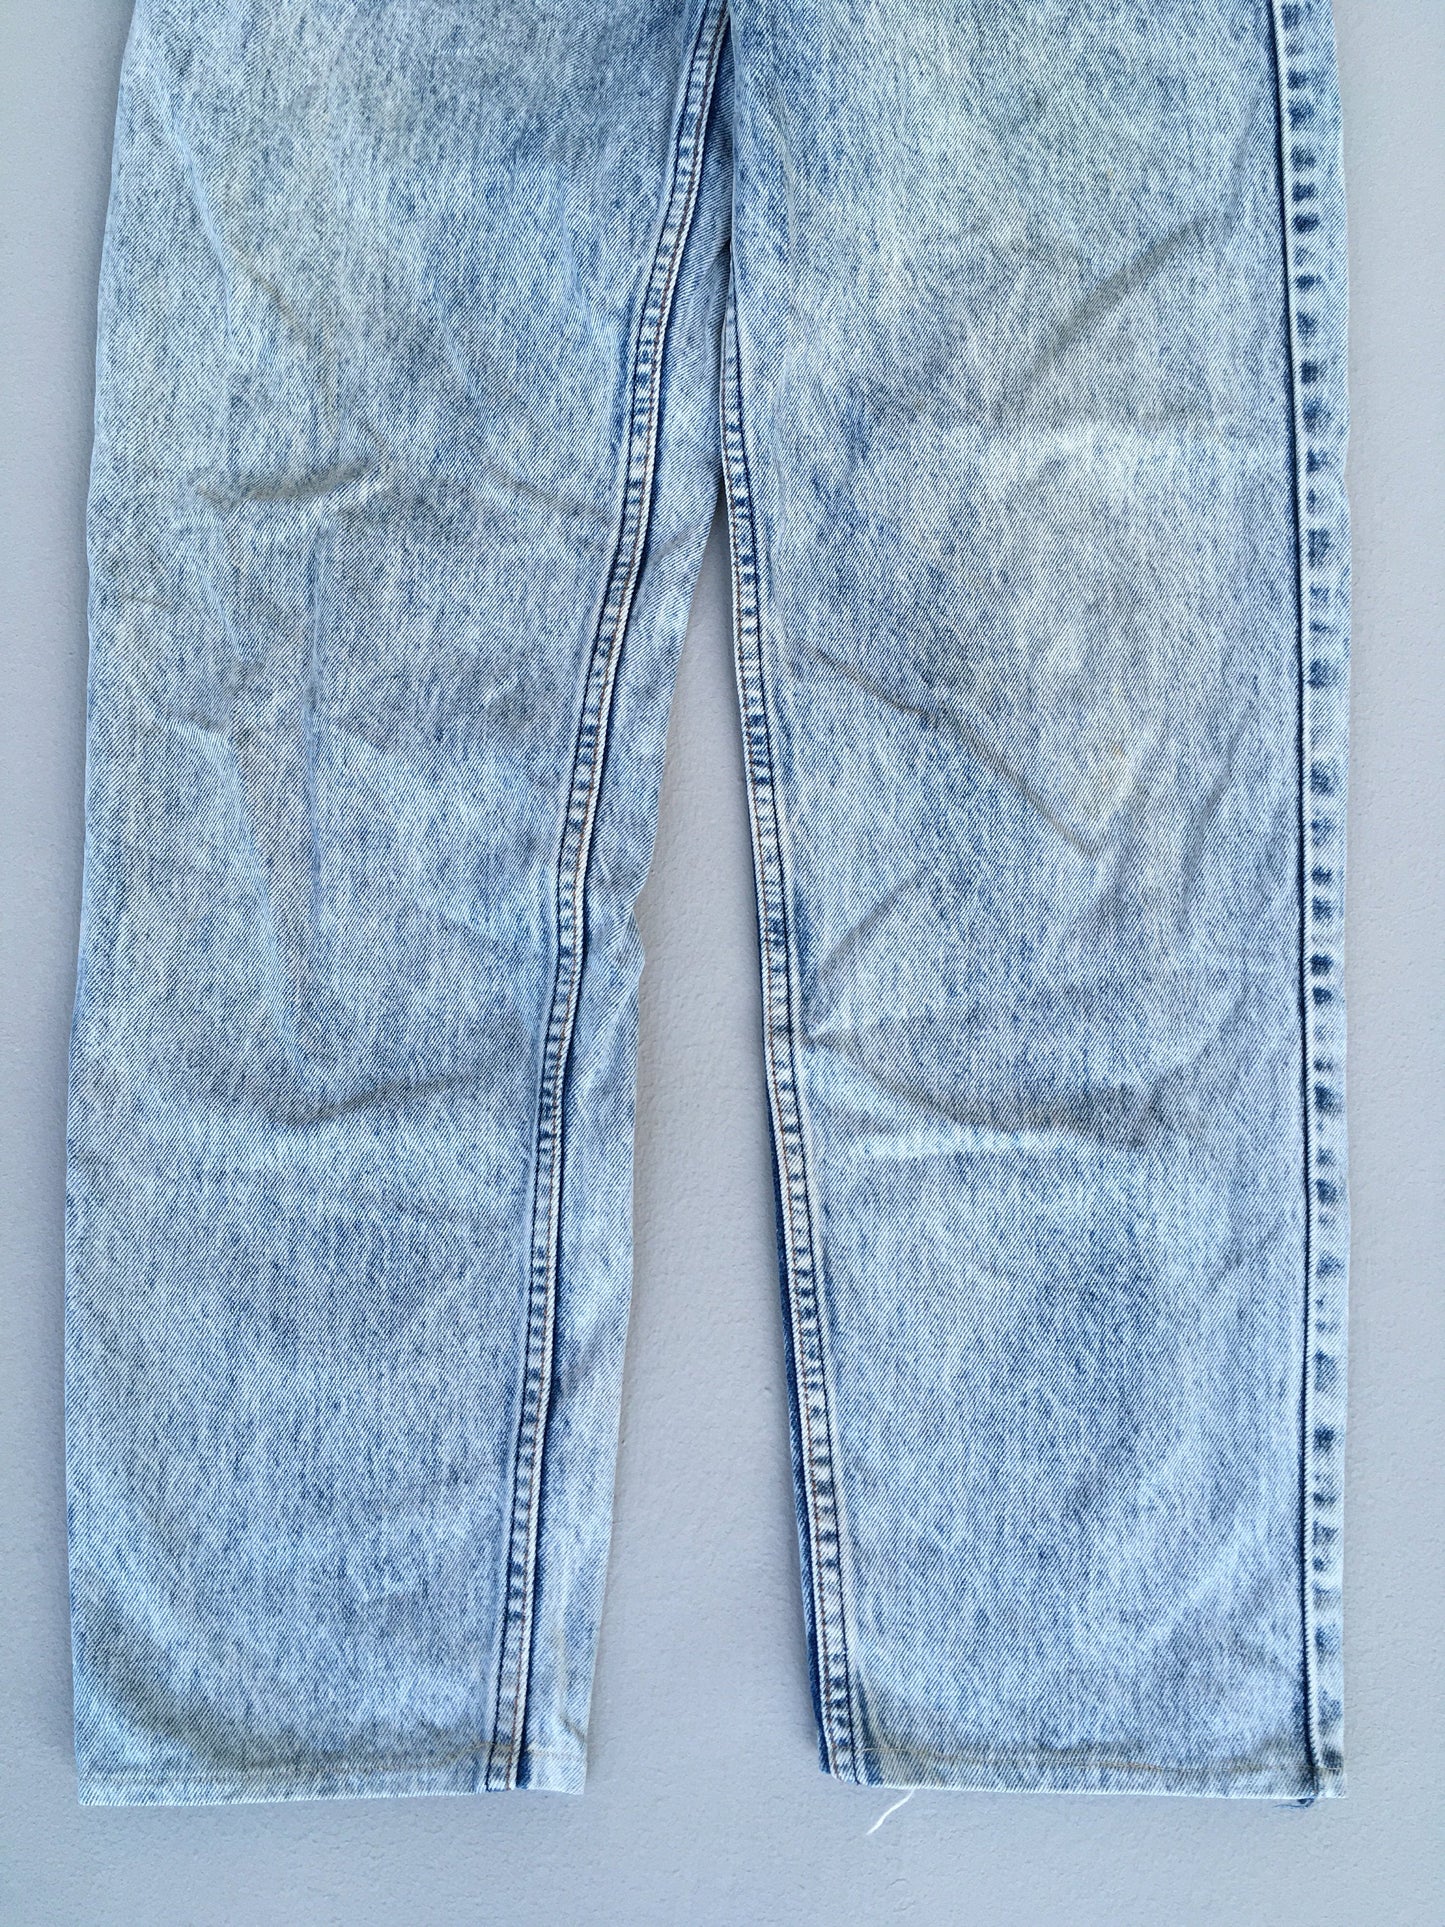 Size 30x27.5 Levi's 626 Faded Blue Jeans High Waisted